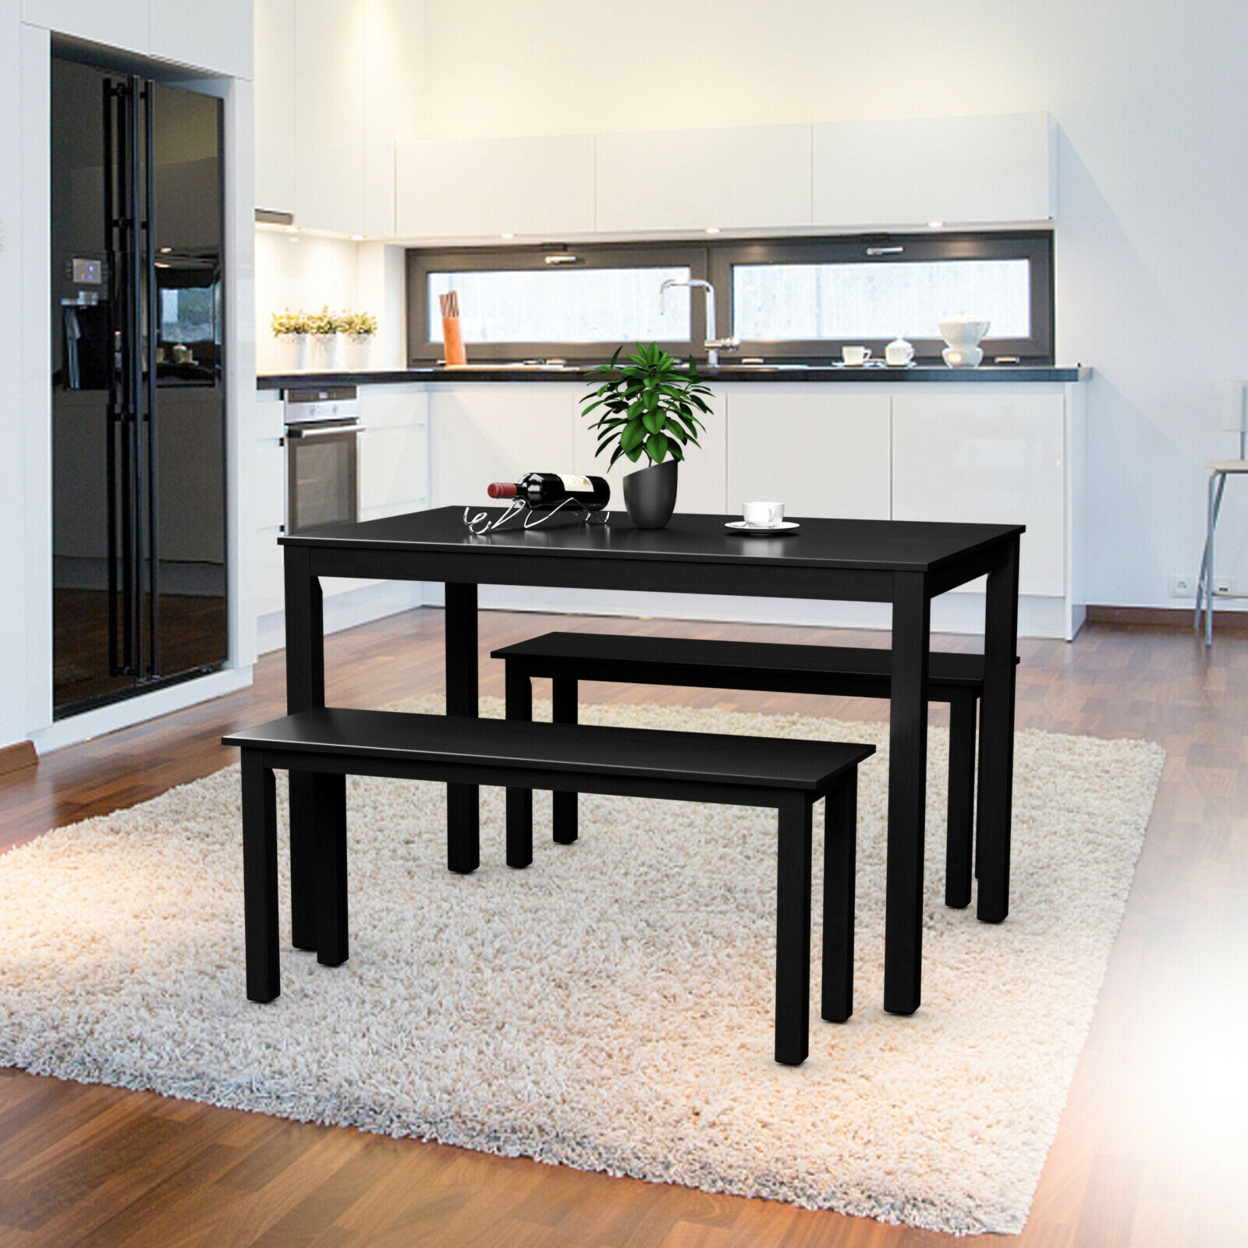 3pcs Dining Set Modern Studio Collection Table With 2 Benches Wood Legs Black